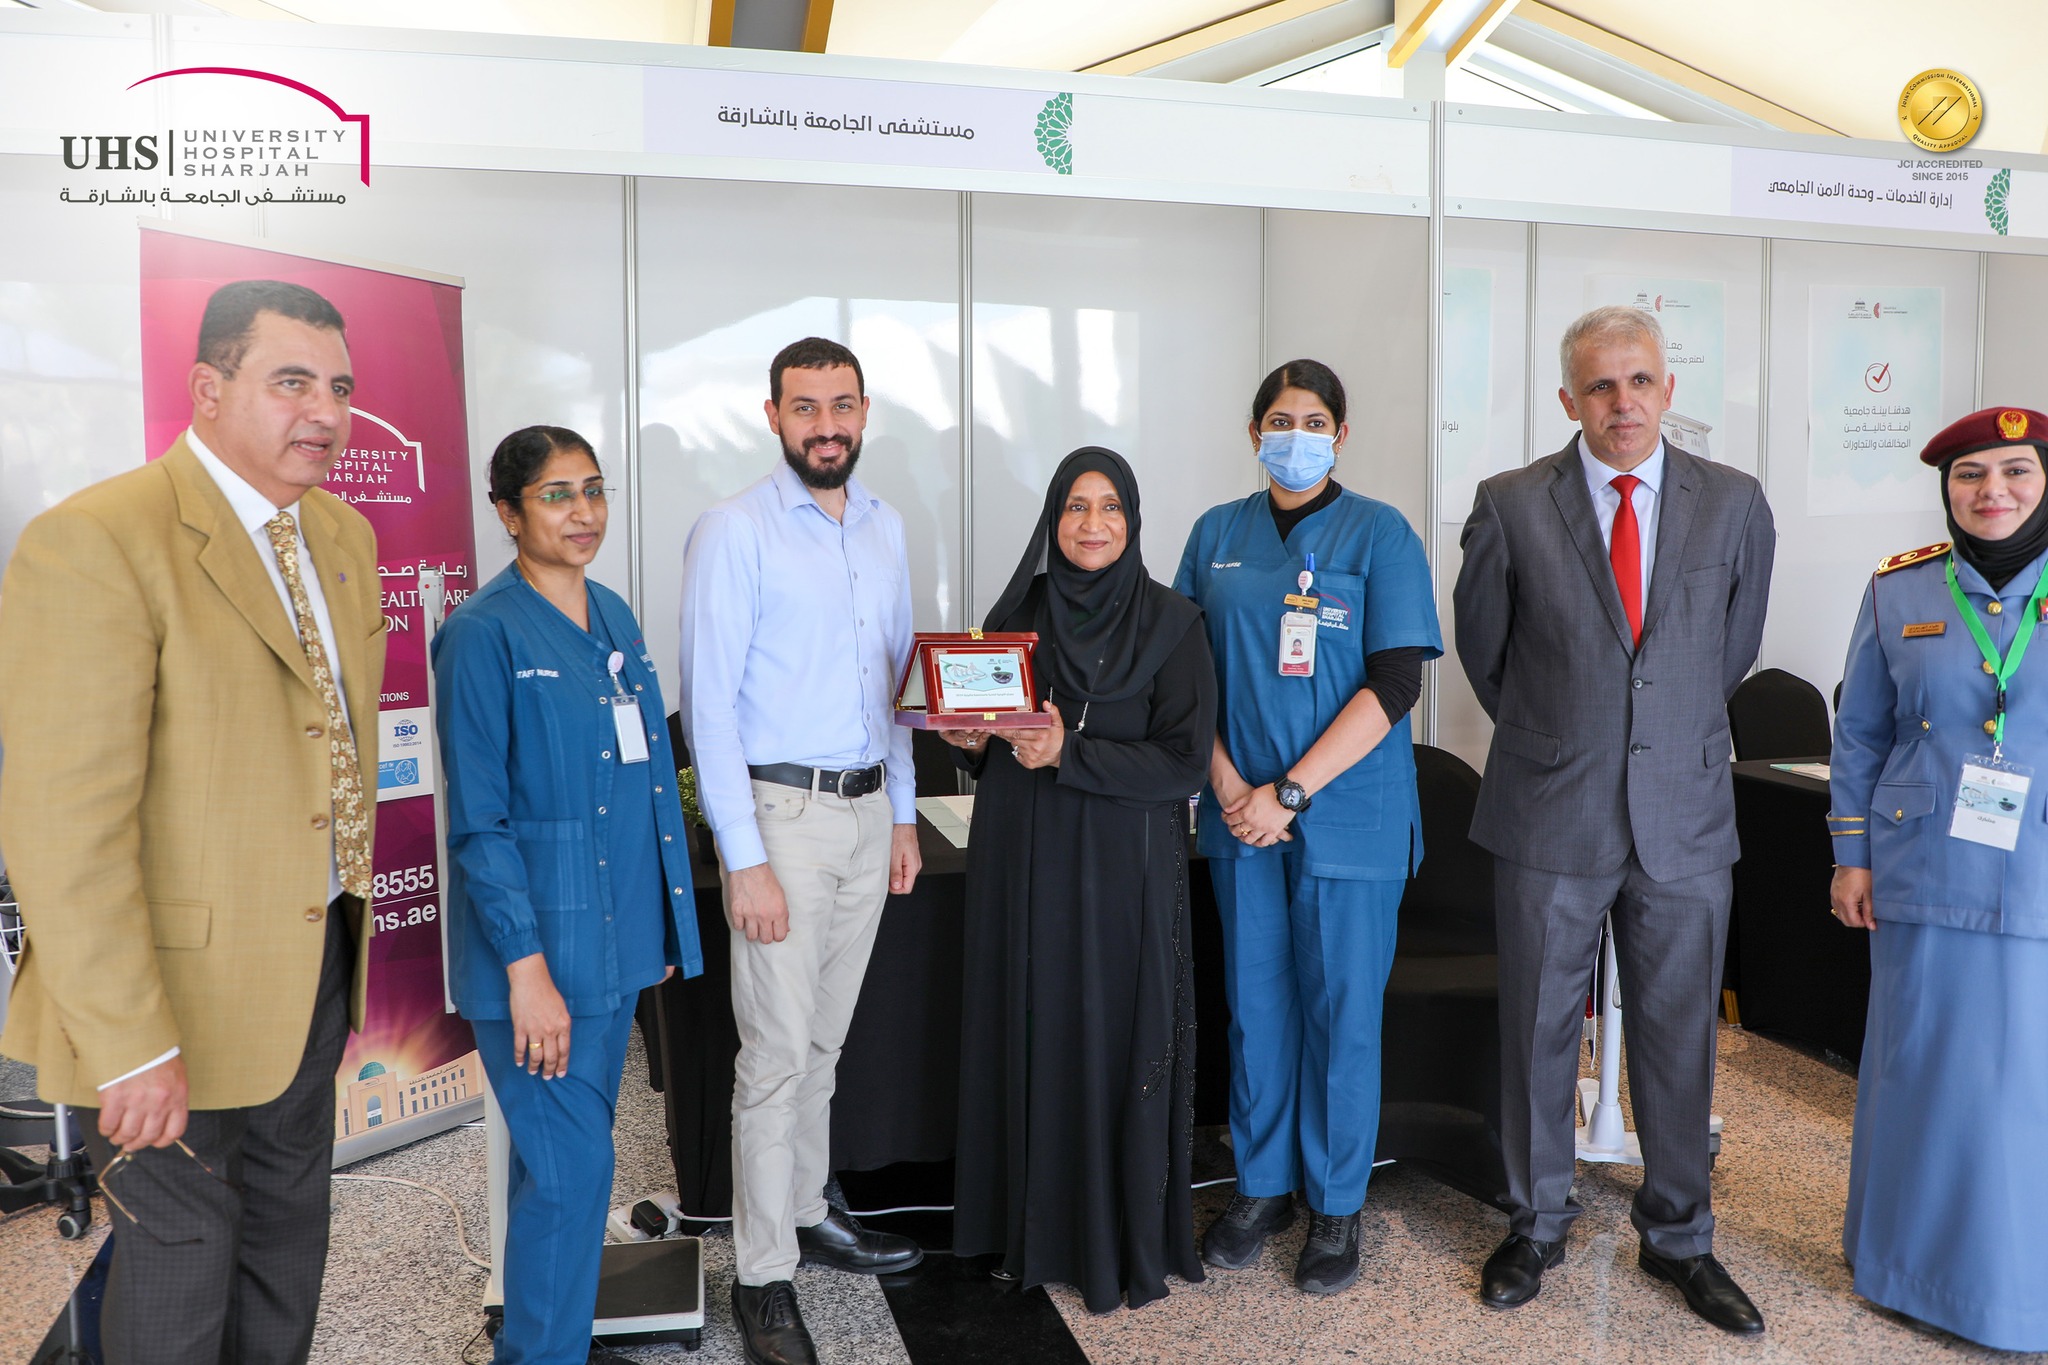 The annual Health, Community, and Environmental Awareness Exhibition at UOS